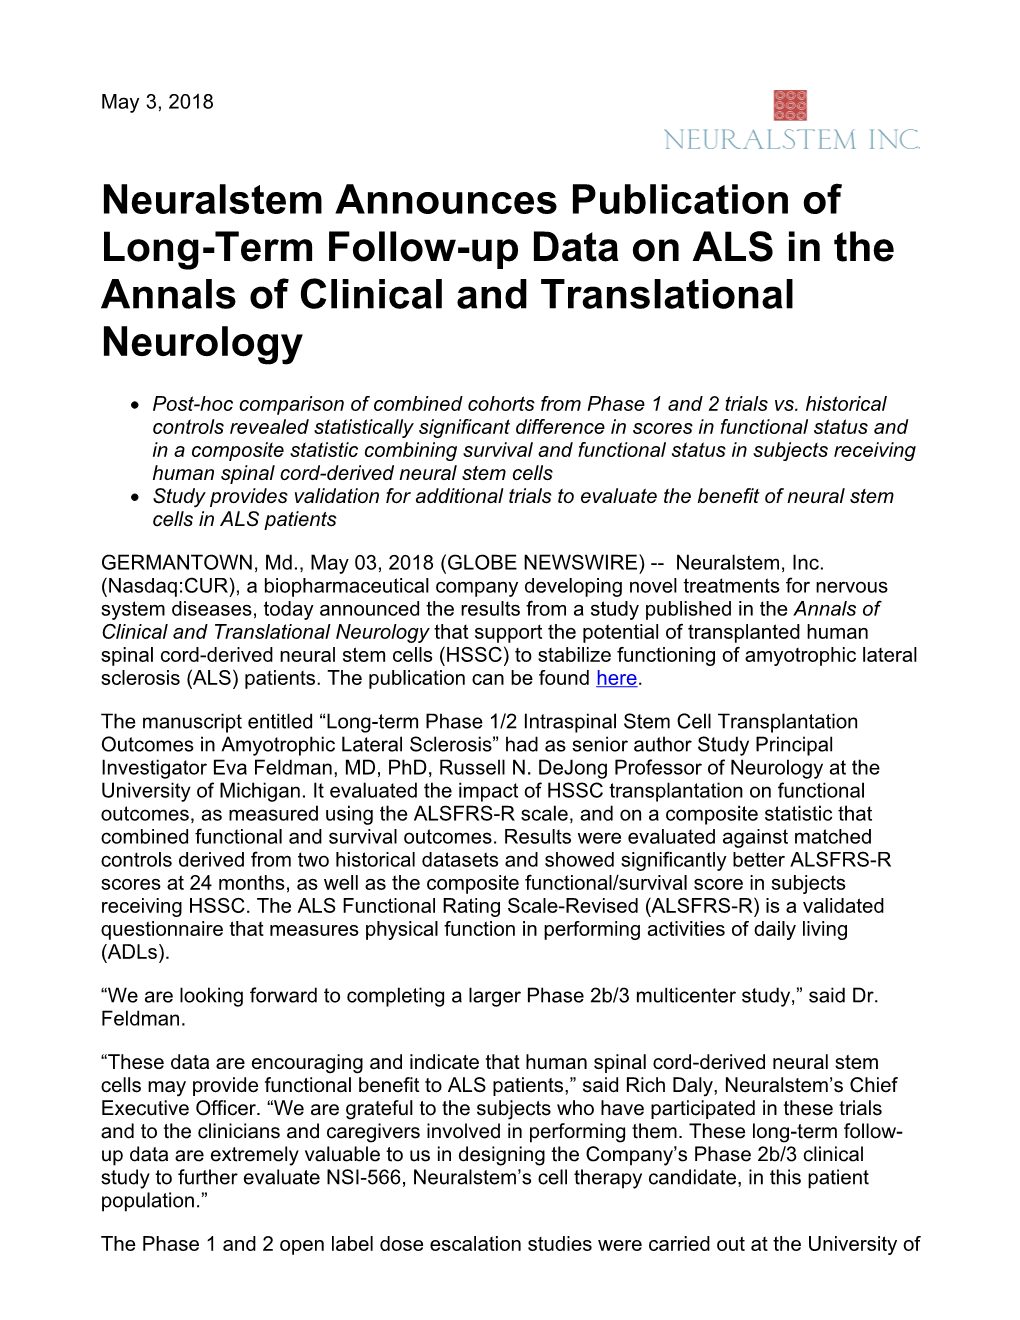 Neuralstem Announces Publication of Long-Term Follow-Up Data on ALS in the Annals of Clinical and Translational Neurology